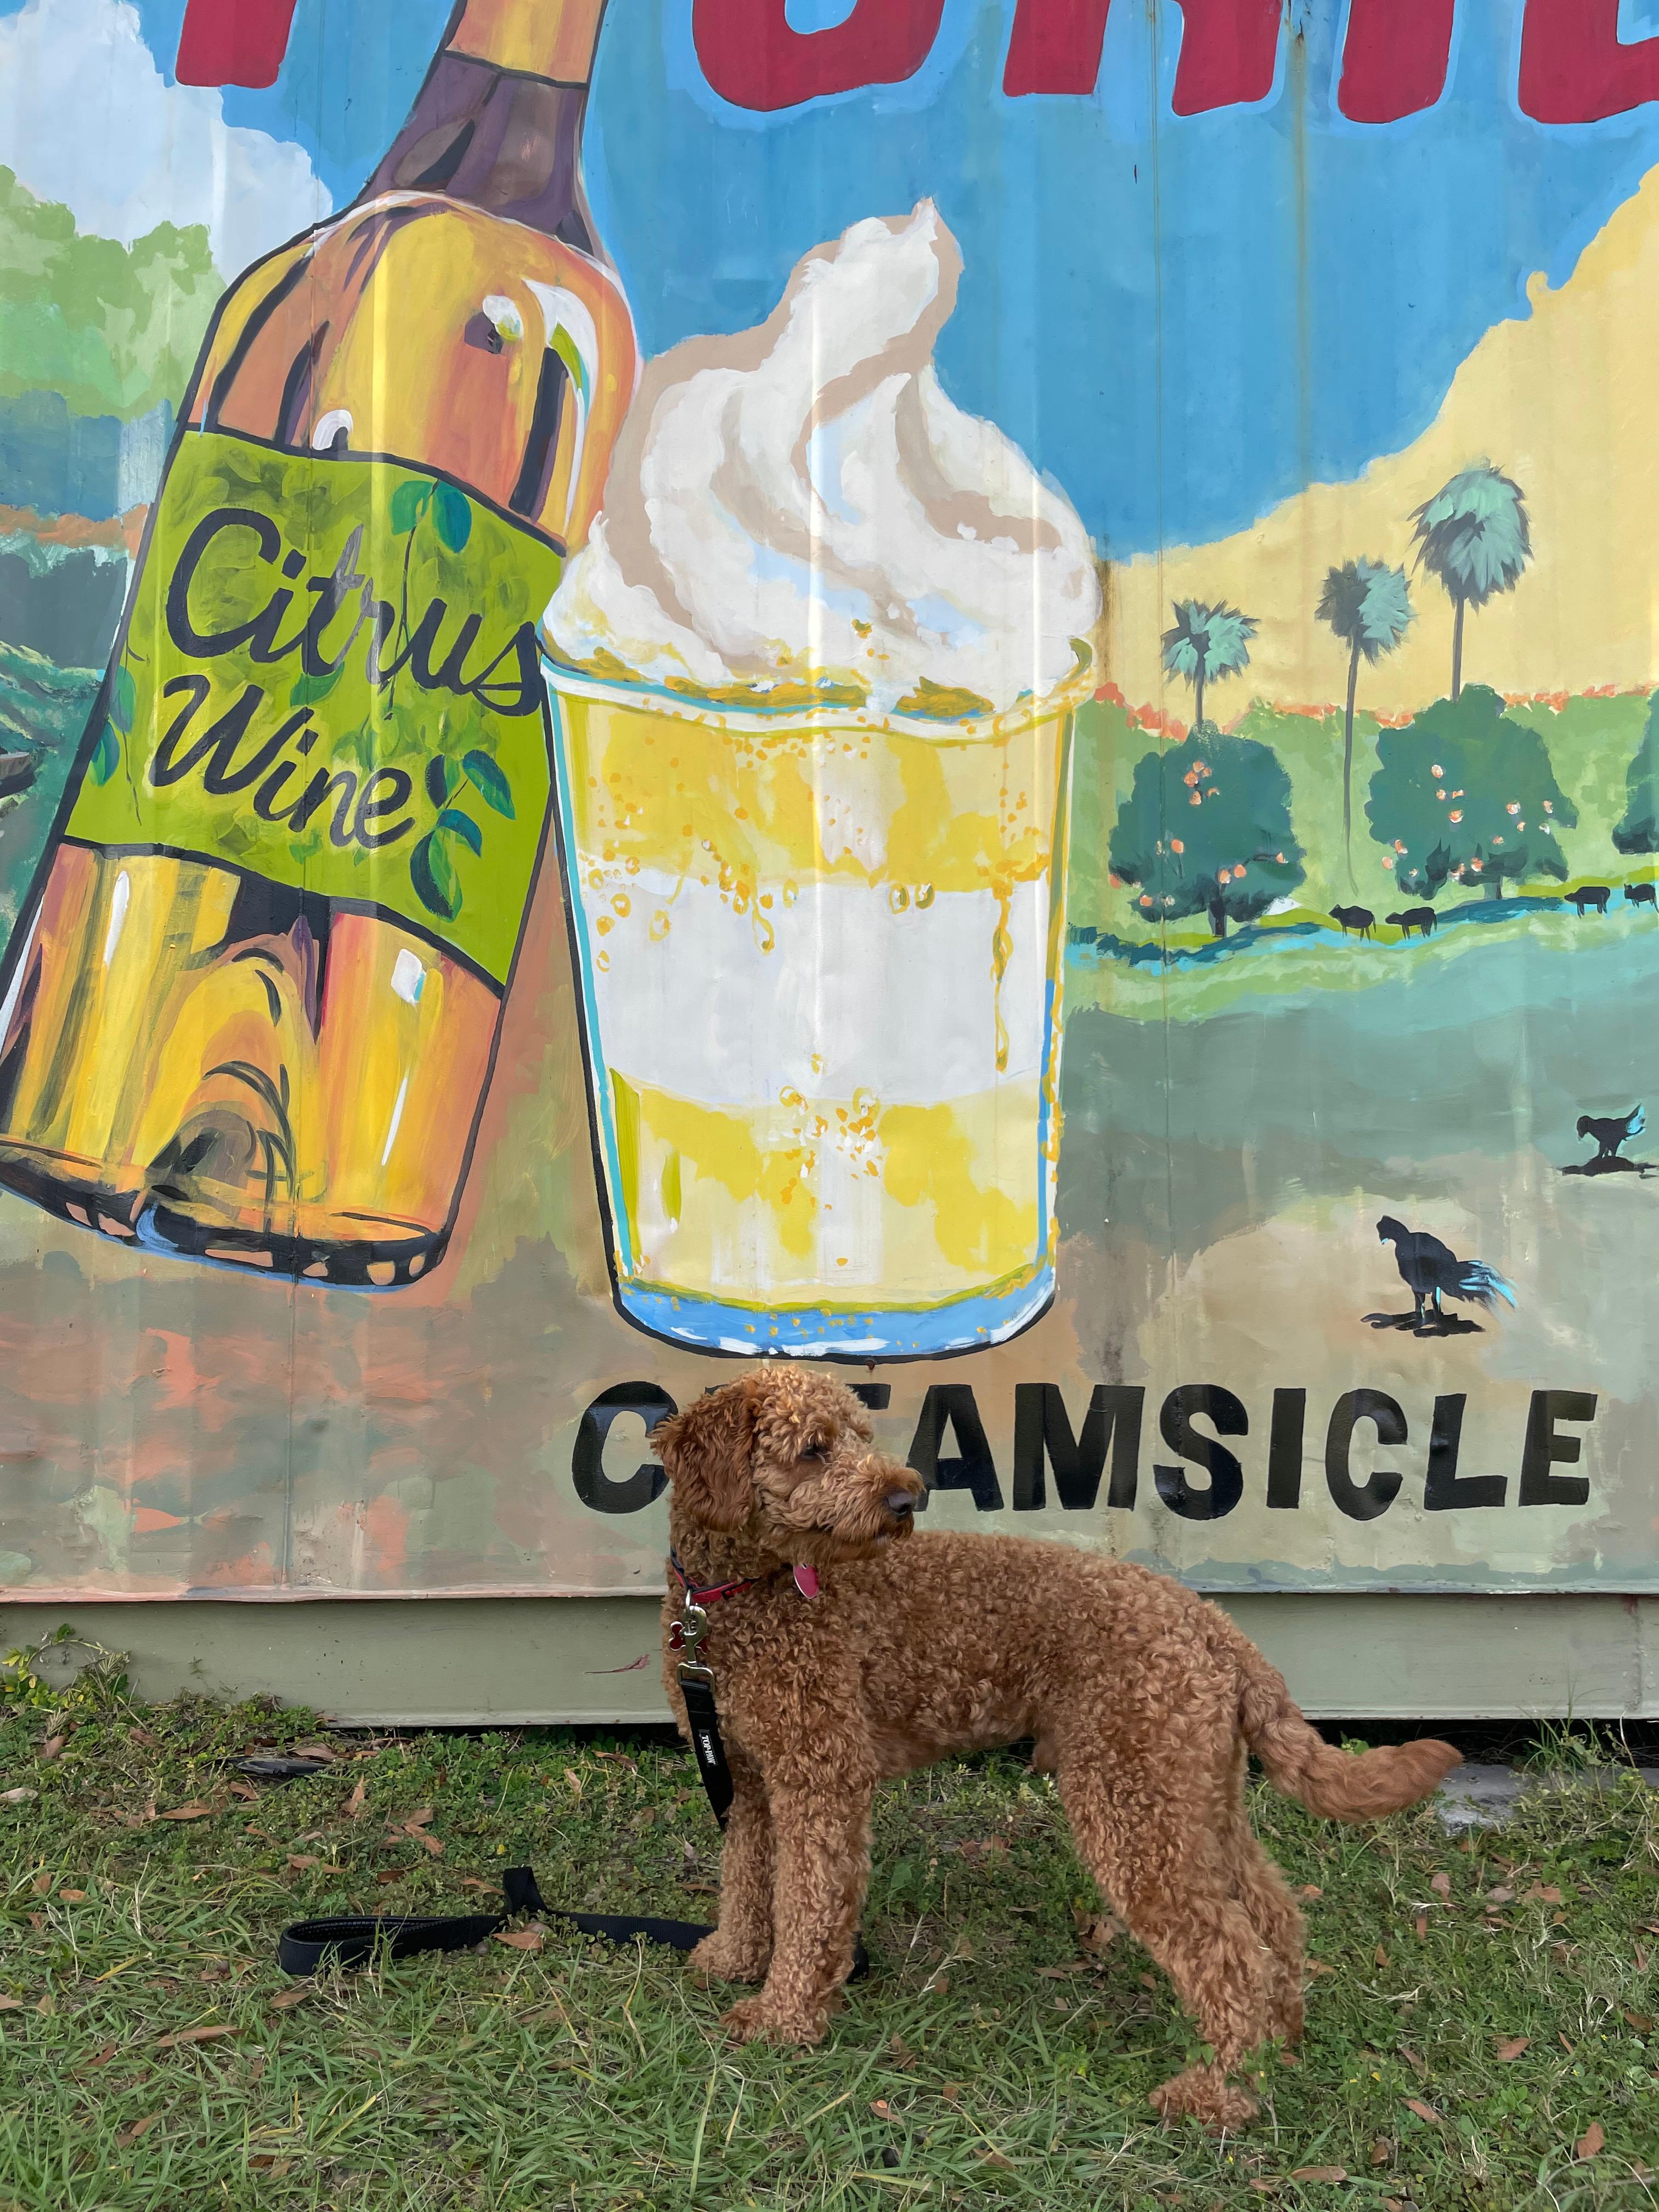 Teddy is looking for a Florida-Orange creamsicle near Orland Florida at the local Orange Farm.